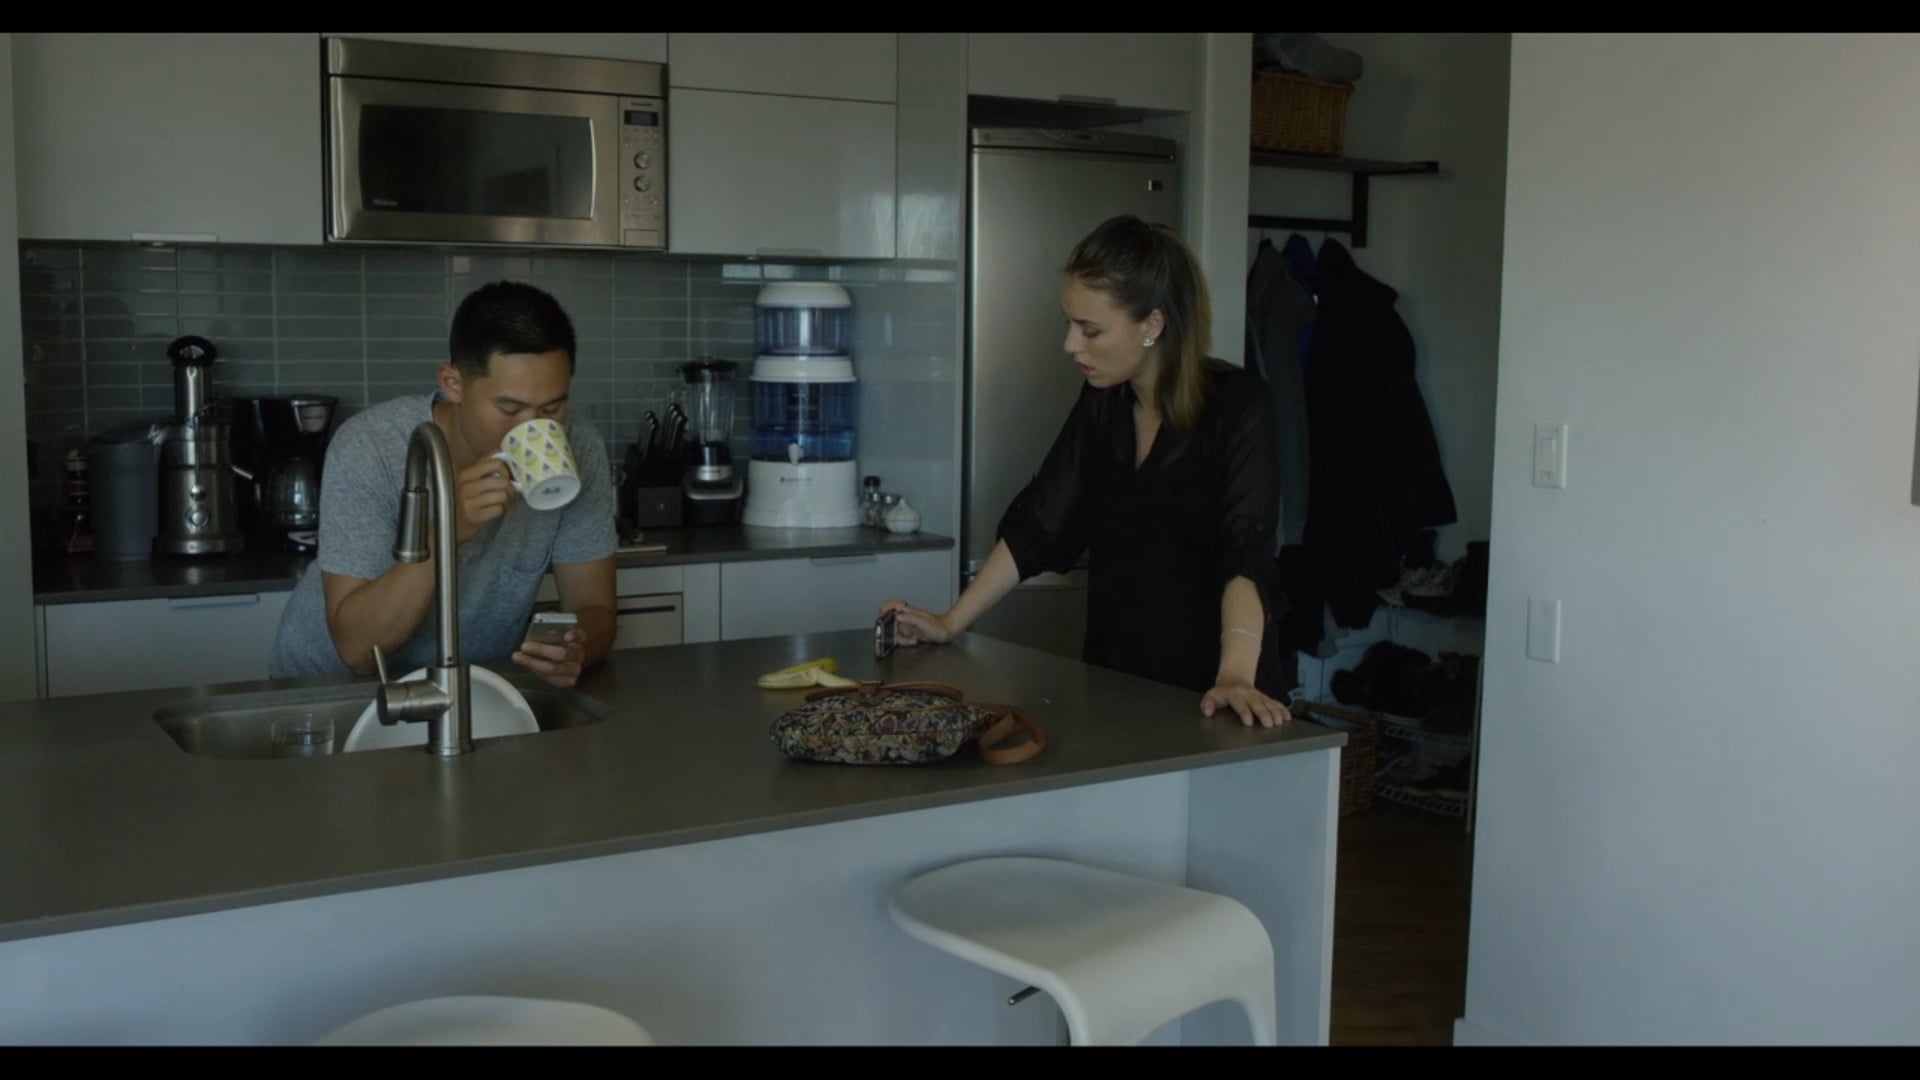 Footage from short film "#intimacy"